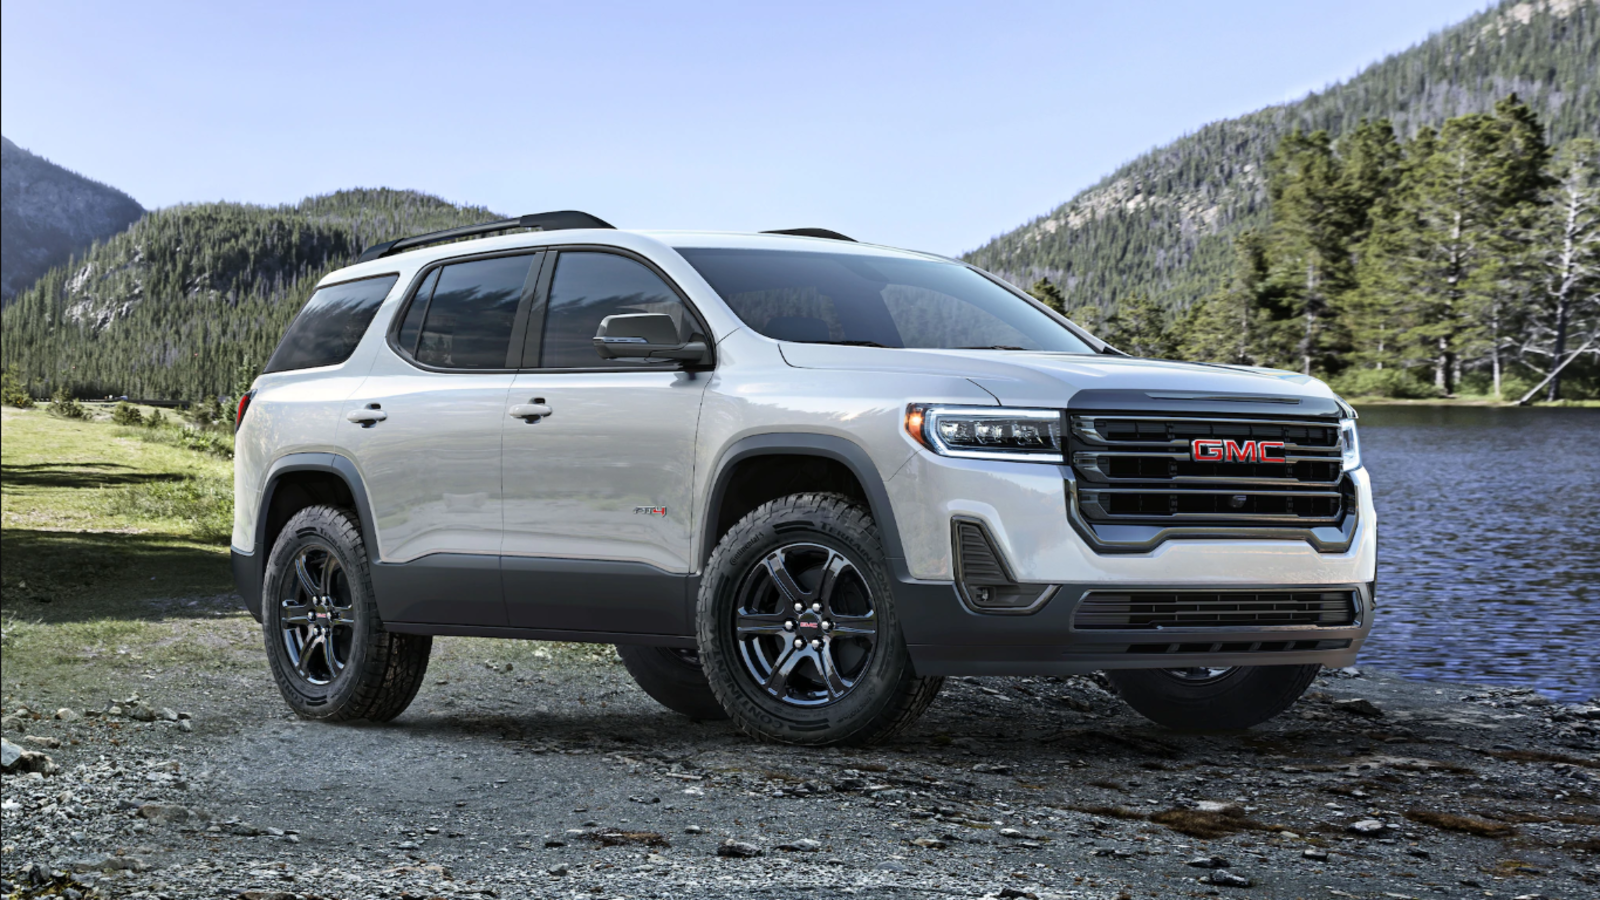 Illustration for article titled The 2020 GMC Acadia starts at $30,995